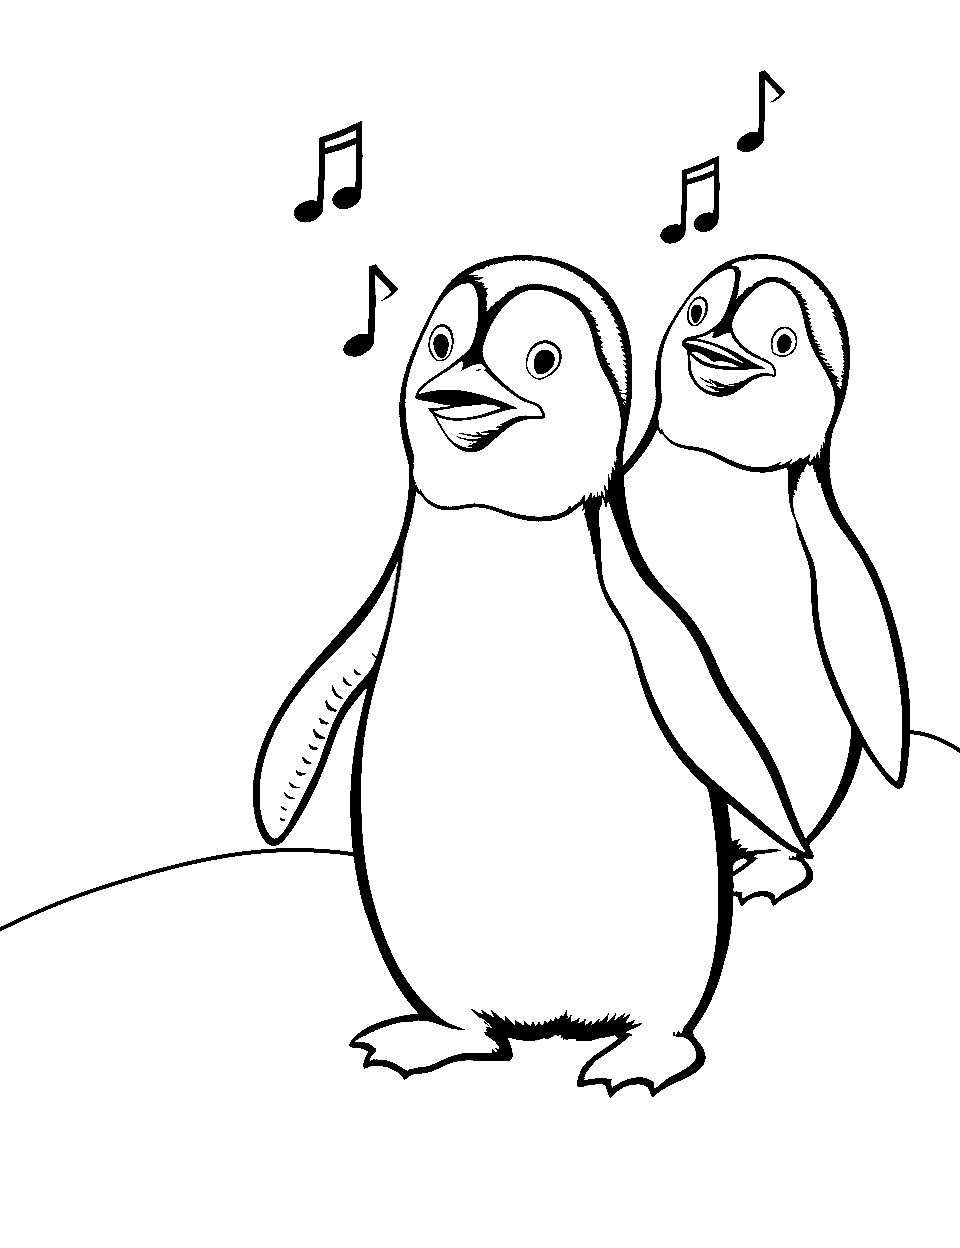 Singing Penguin Group Coloring Page - A group of penguins harmonizing, singing a chilly tune.